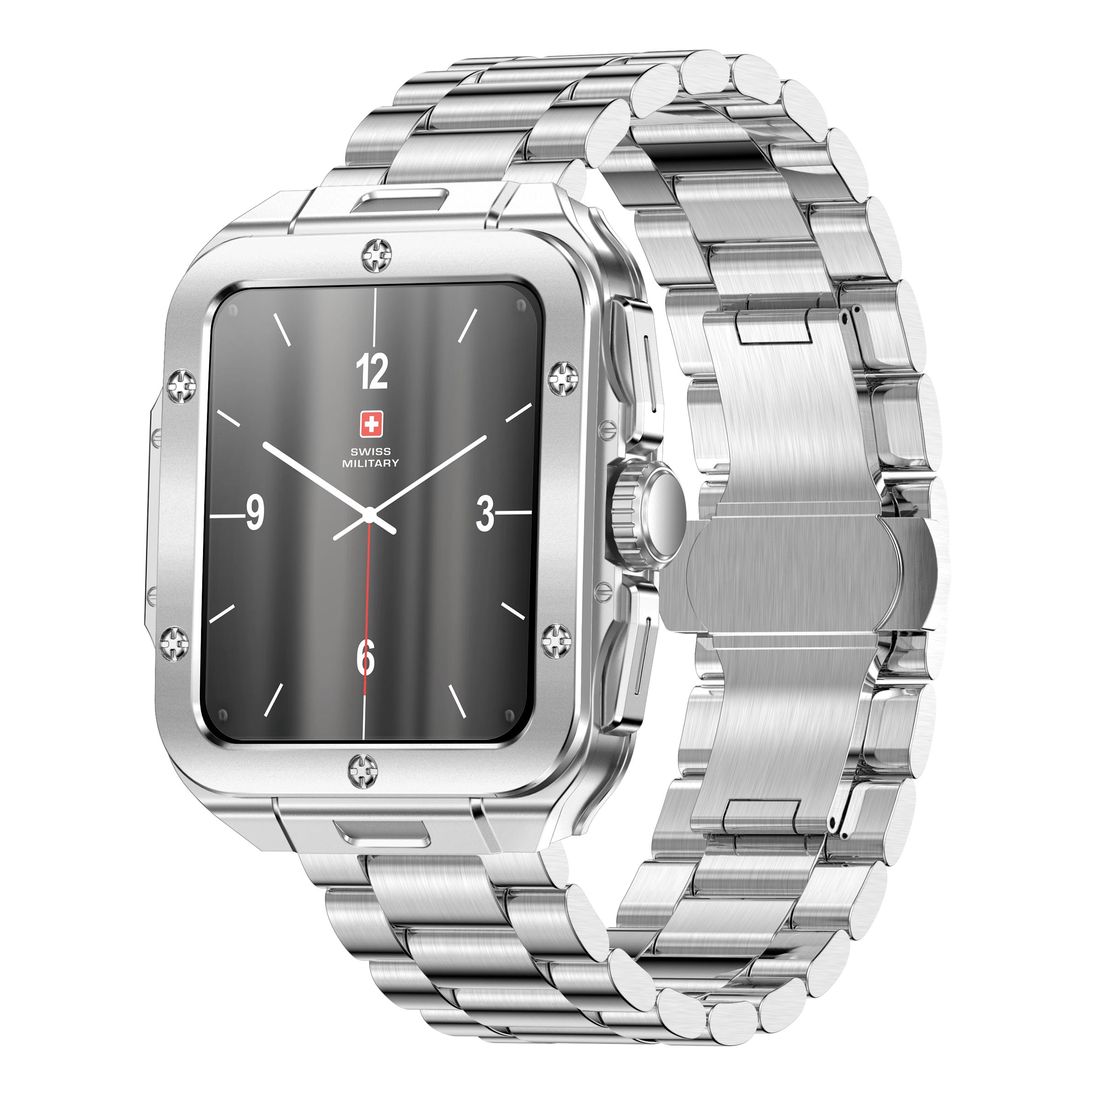 Swiss Military Alps 2 Smartwatch with Silver Frame and Silver StainlessSteel Strap